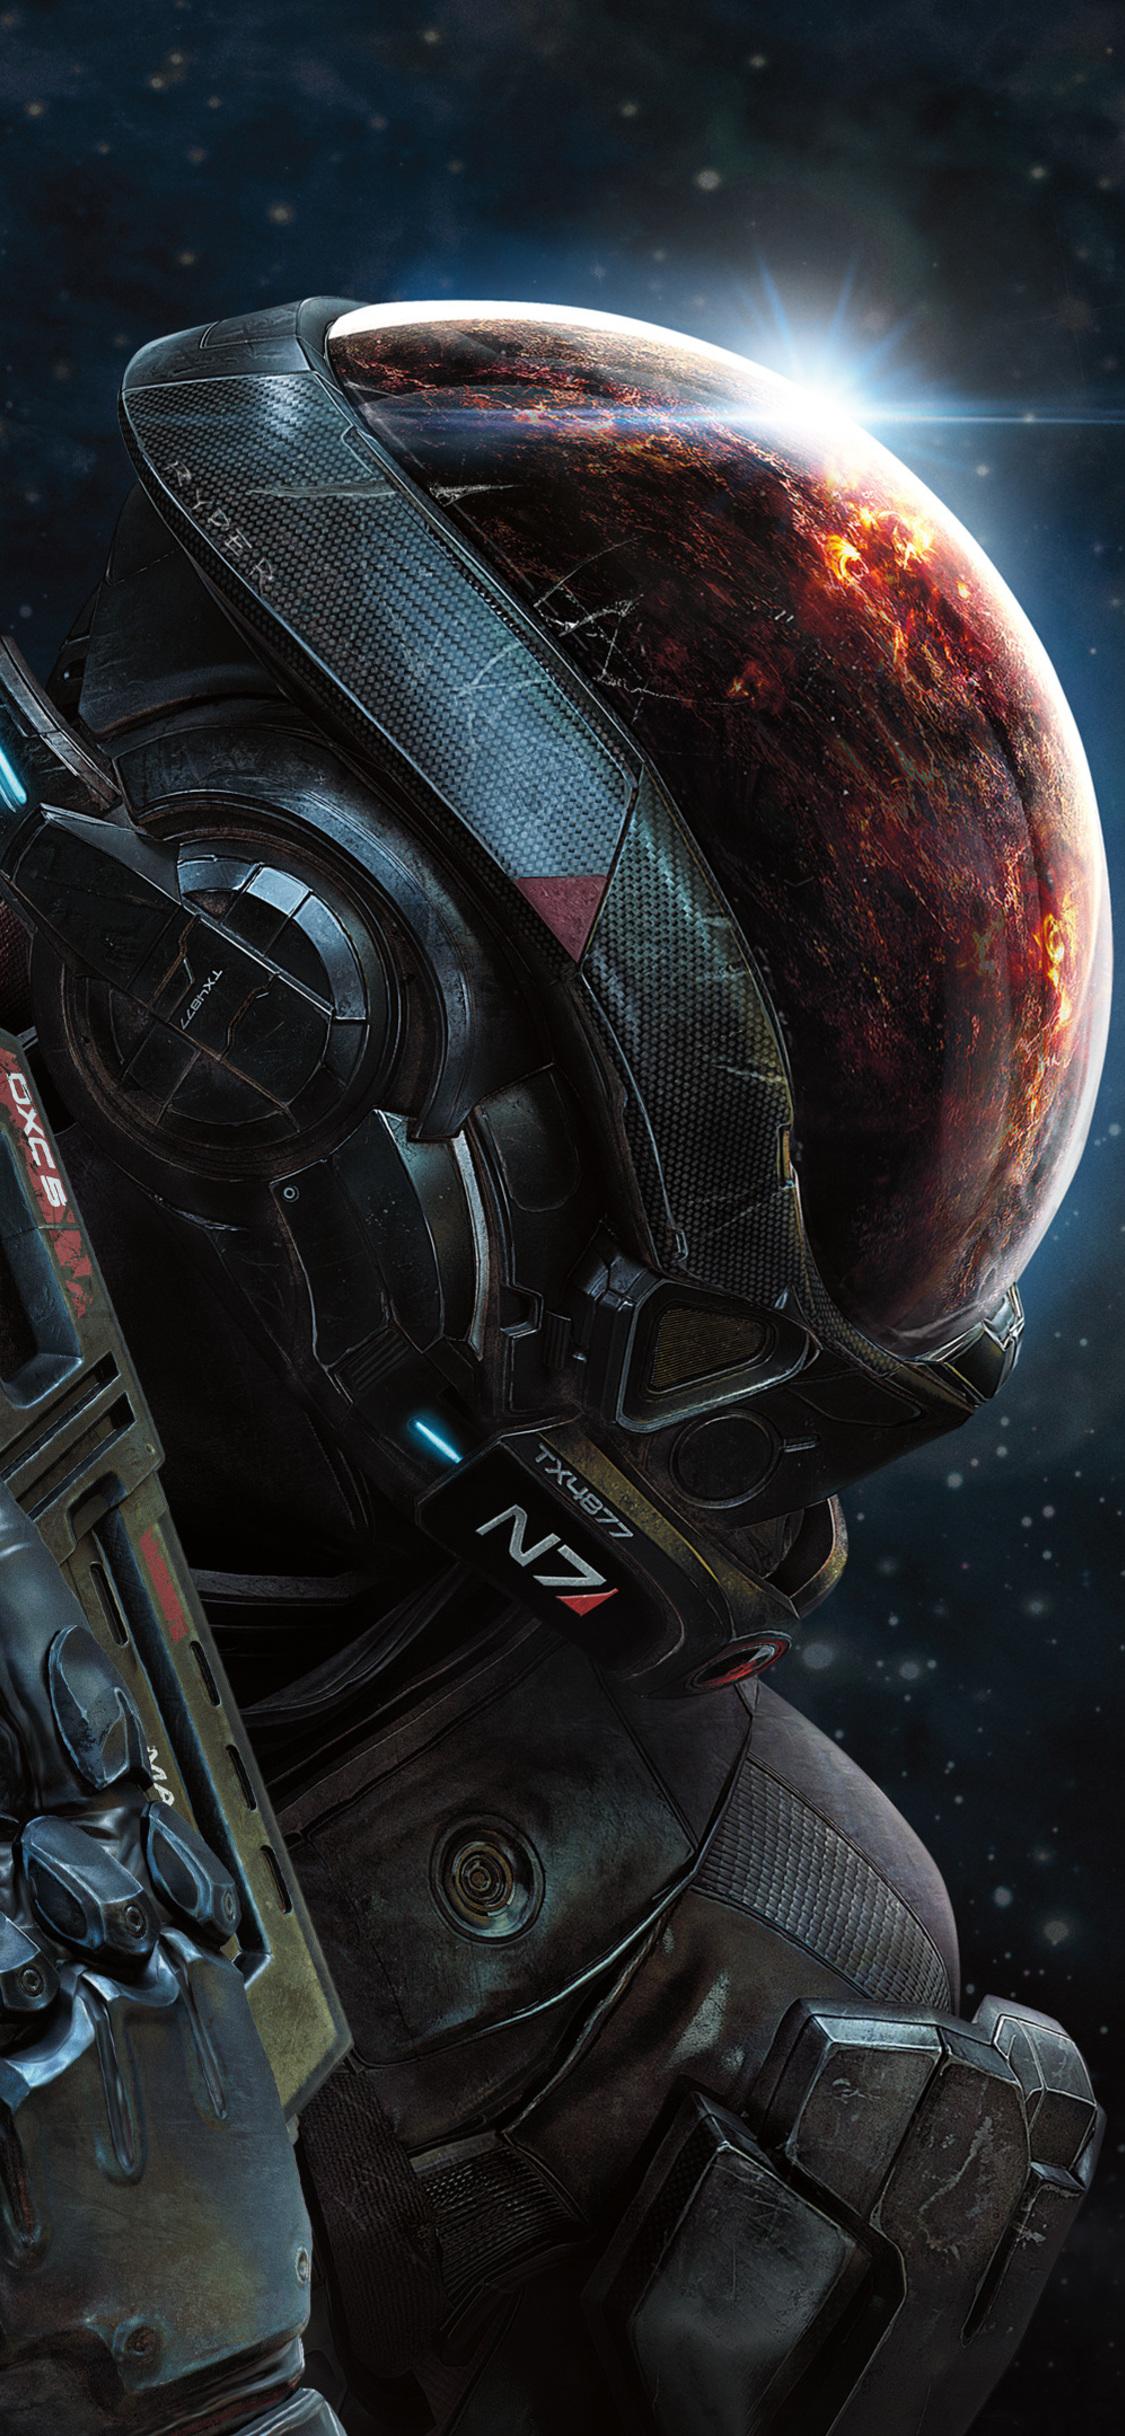 download the new version for iphoneMass Effect